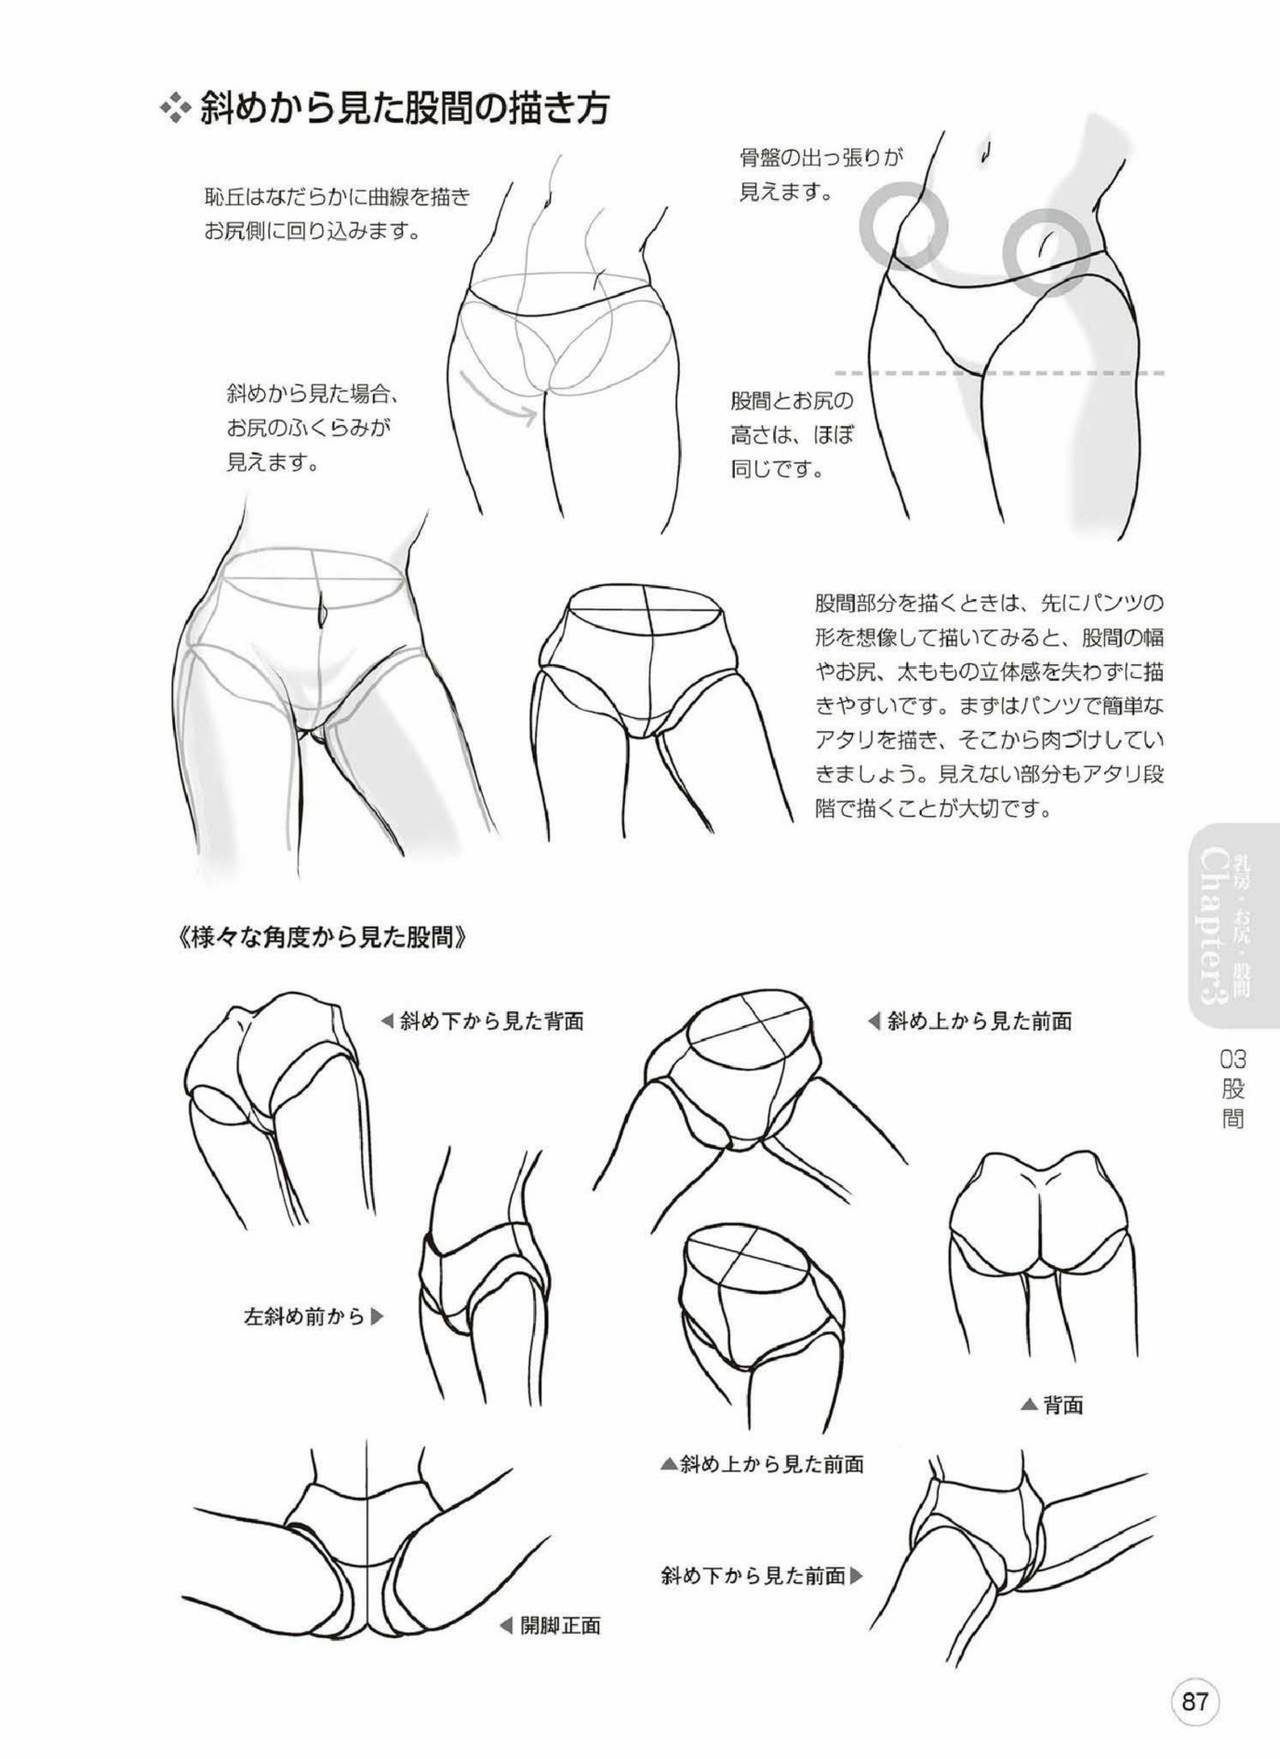 How to draw a human body part of a girl - Sexyly attractive! 87